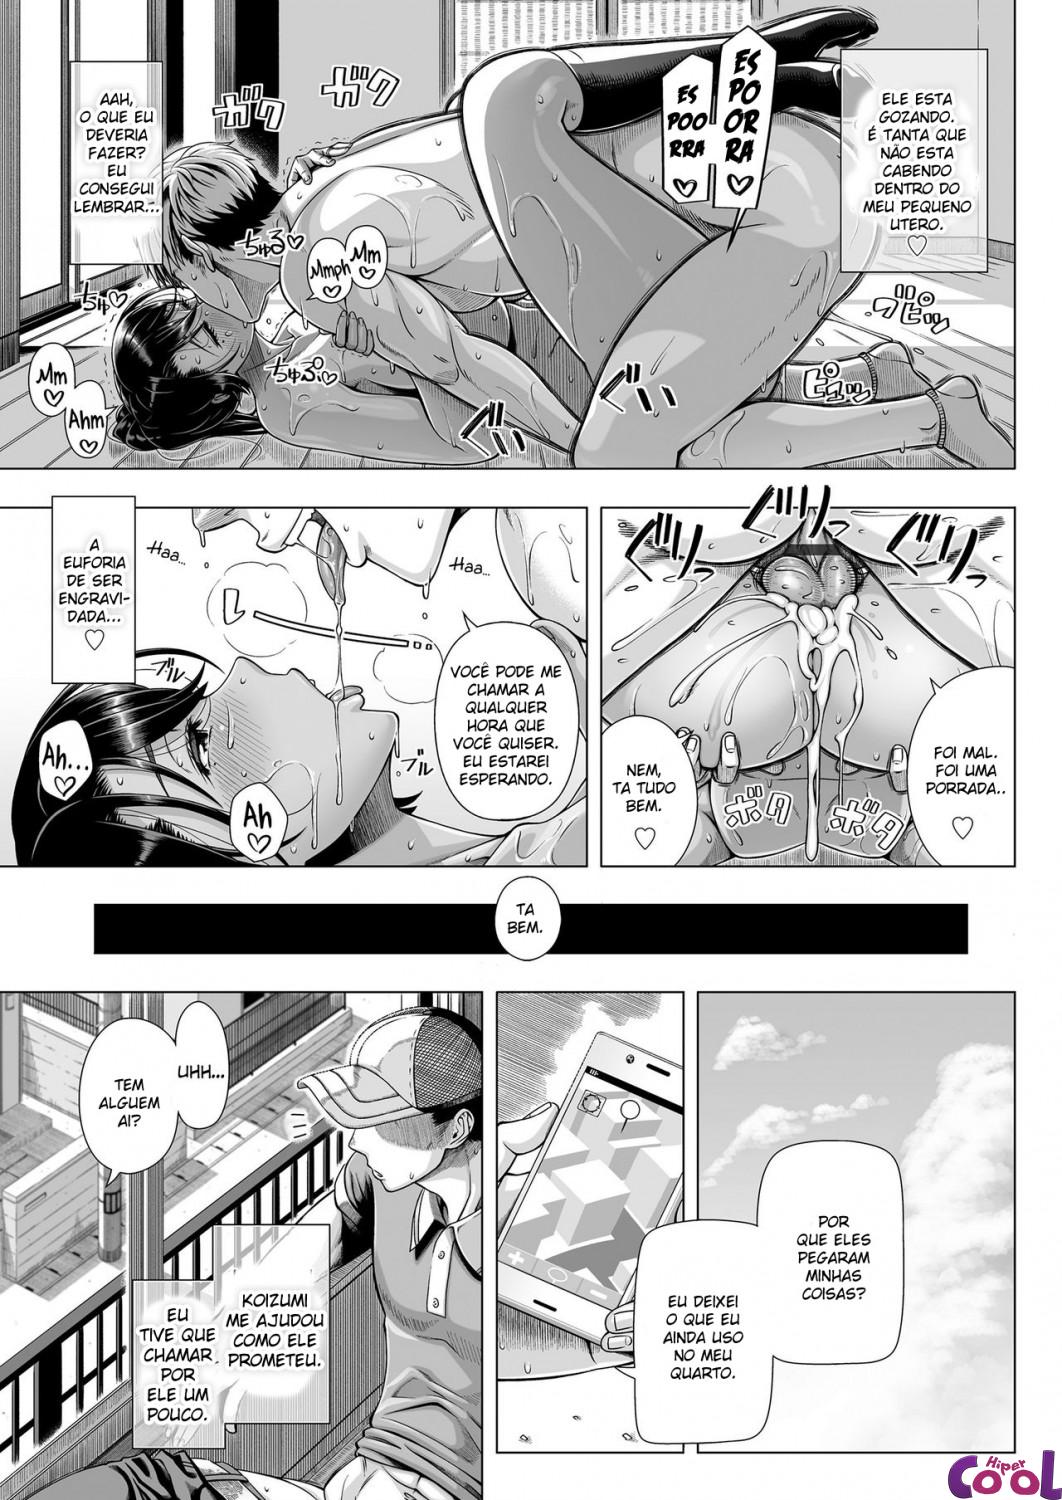 delivery-sex-chapter-01-page-28.jpg